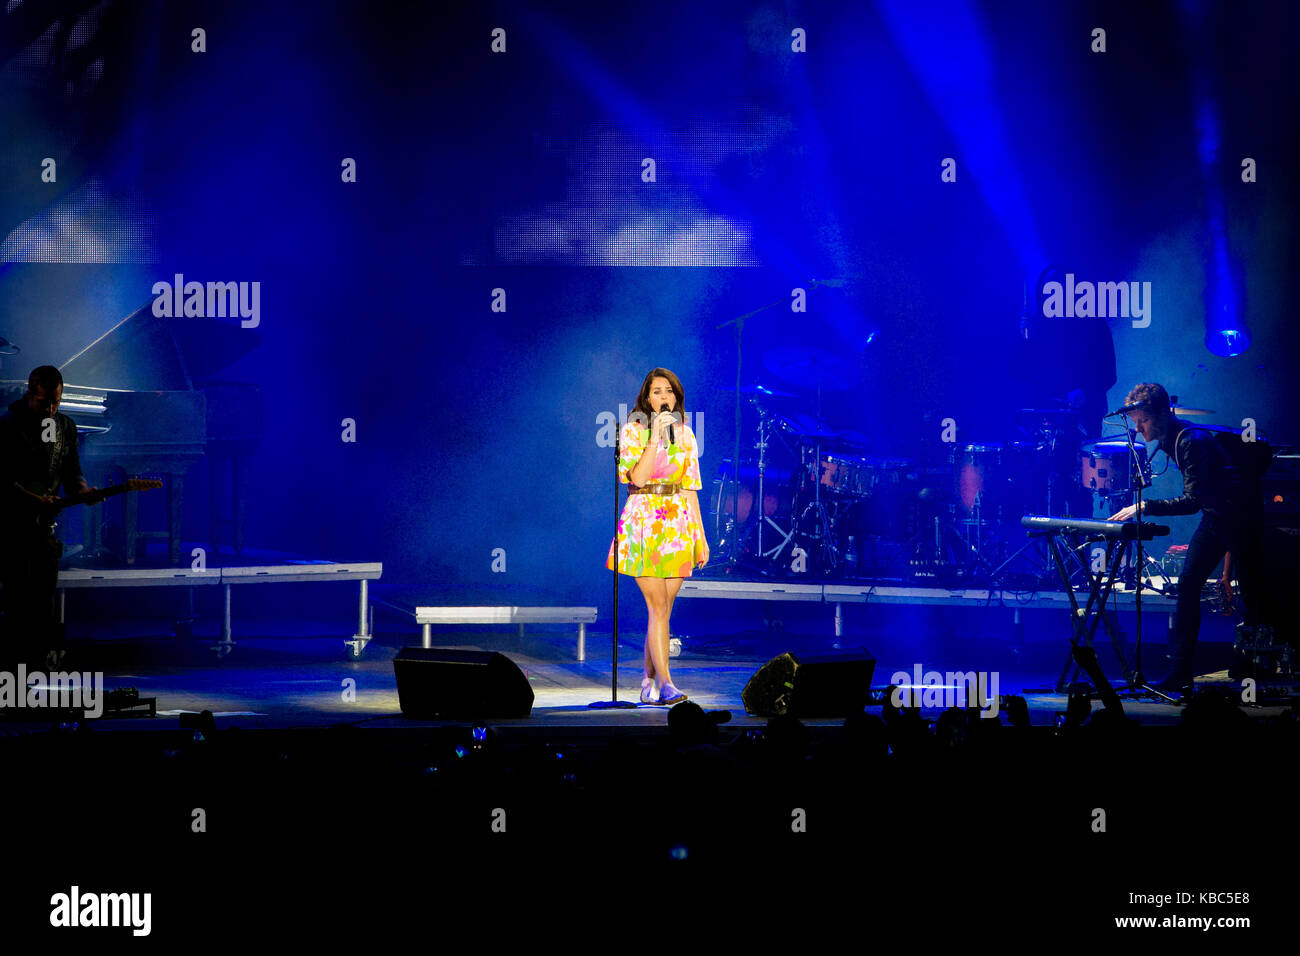 The American singer, songwriter and musician Lana Del Rey performs a live concert at the Norwegian music festival Bergenfest 2014. Norway, 14/06 2014. Stock Photo